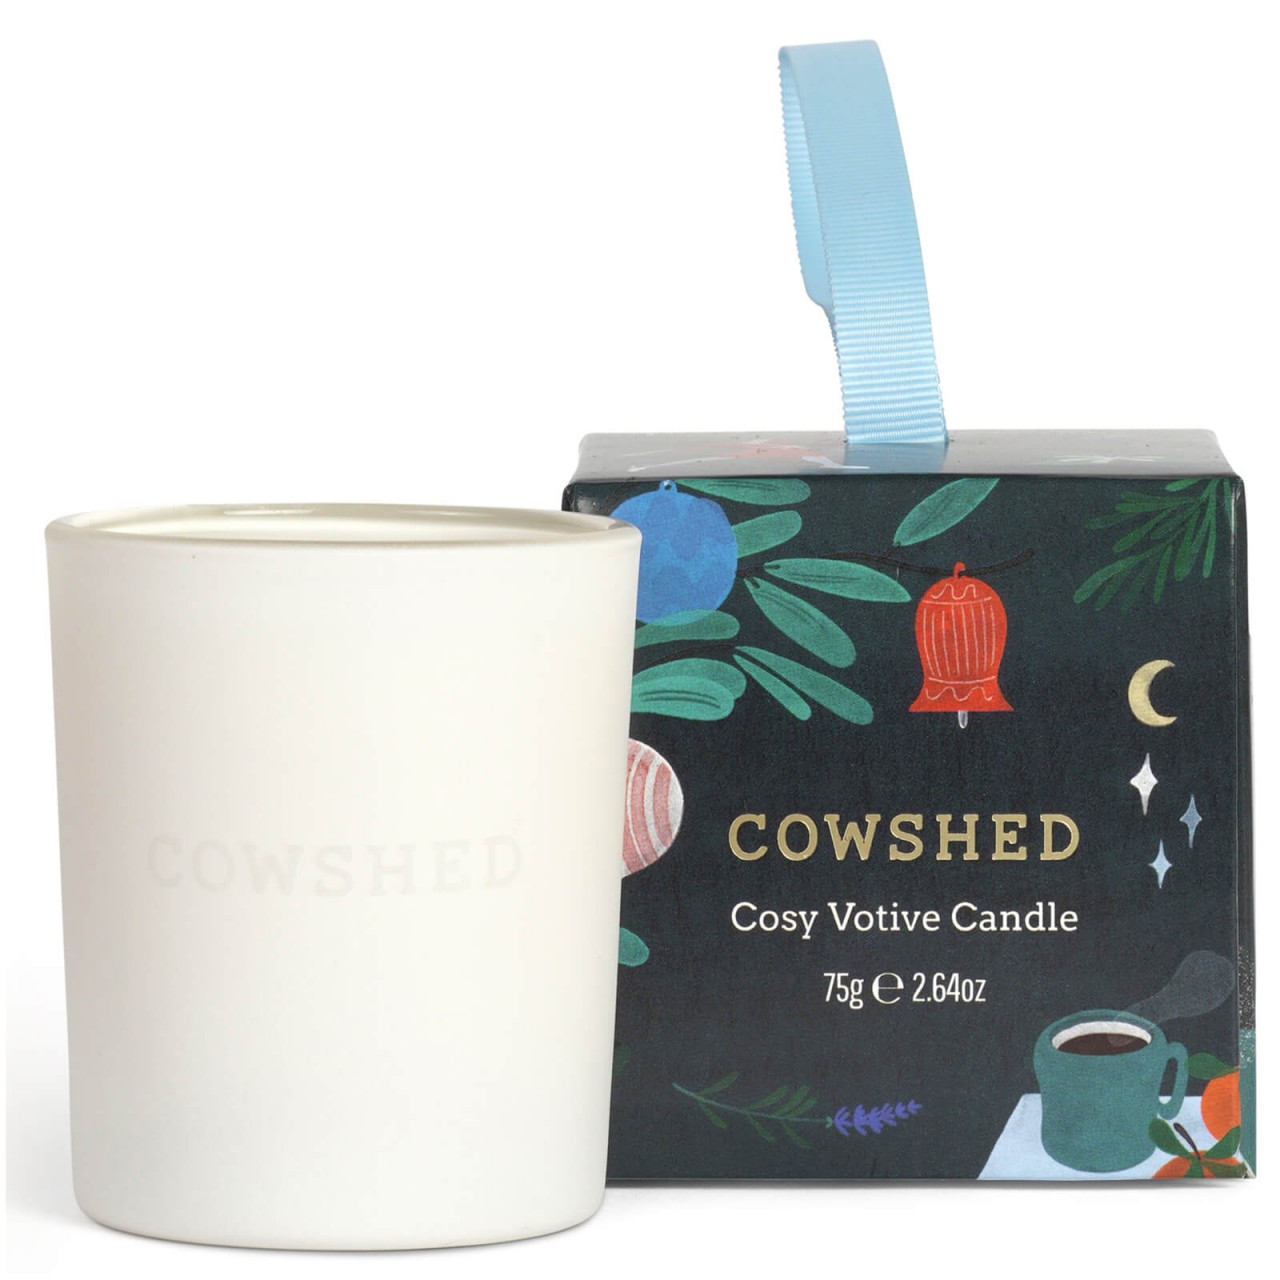 Cowshed Cosy Votive Candle